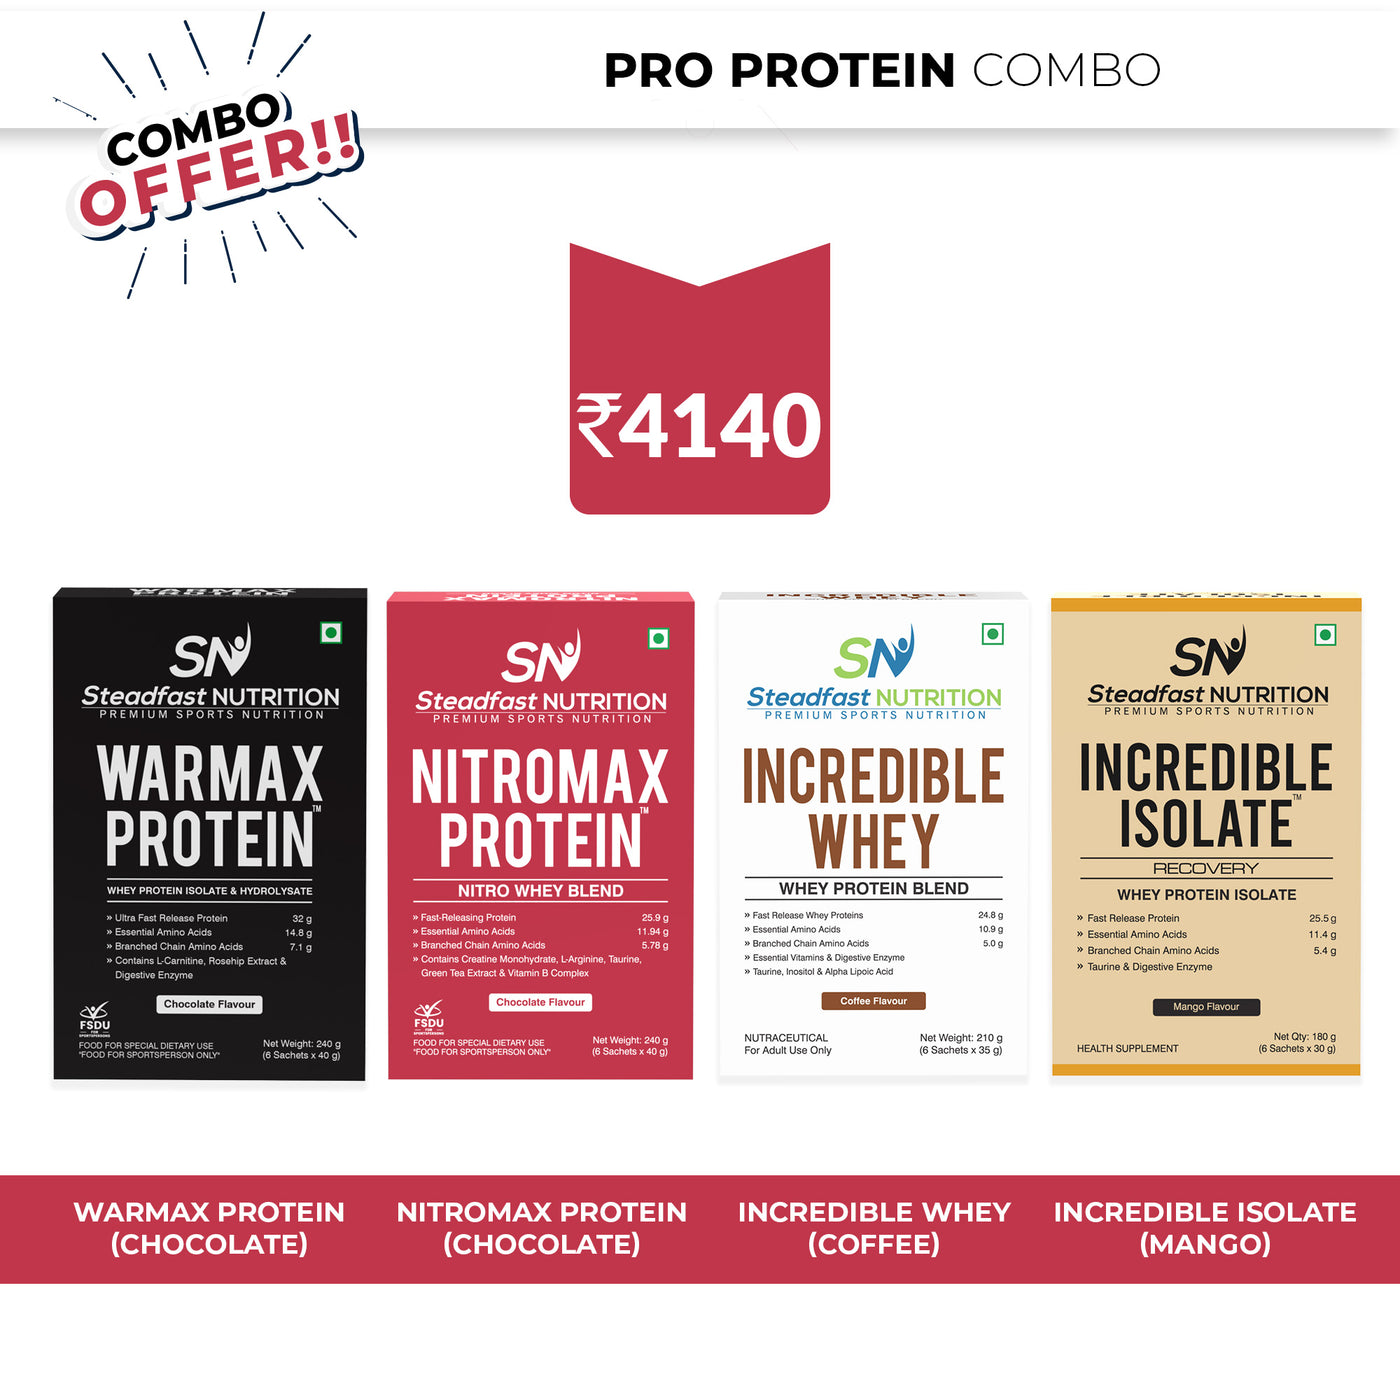 Pro Protein Combo